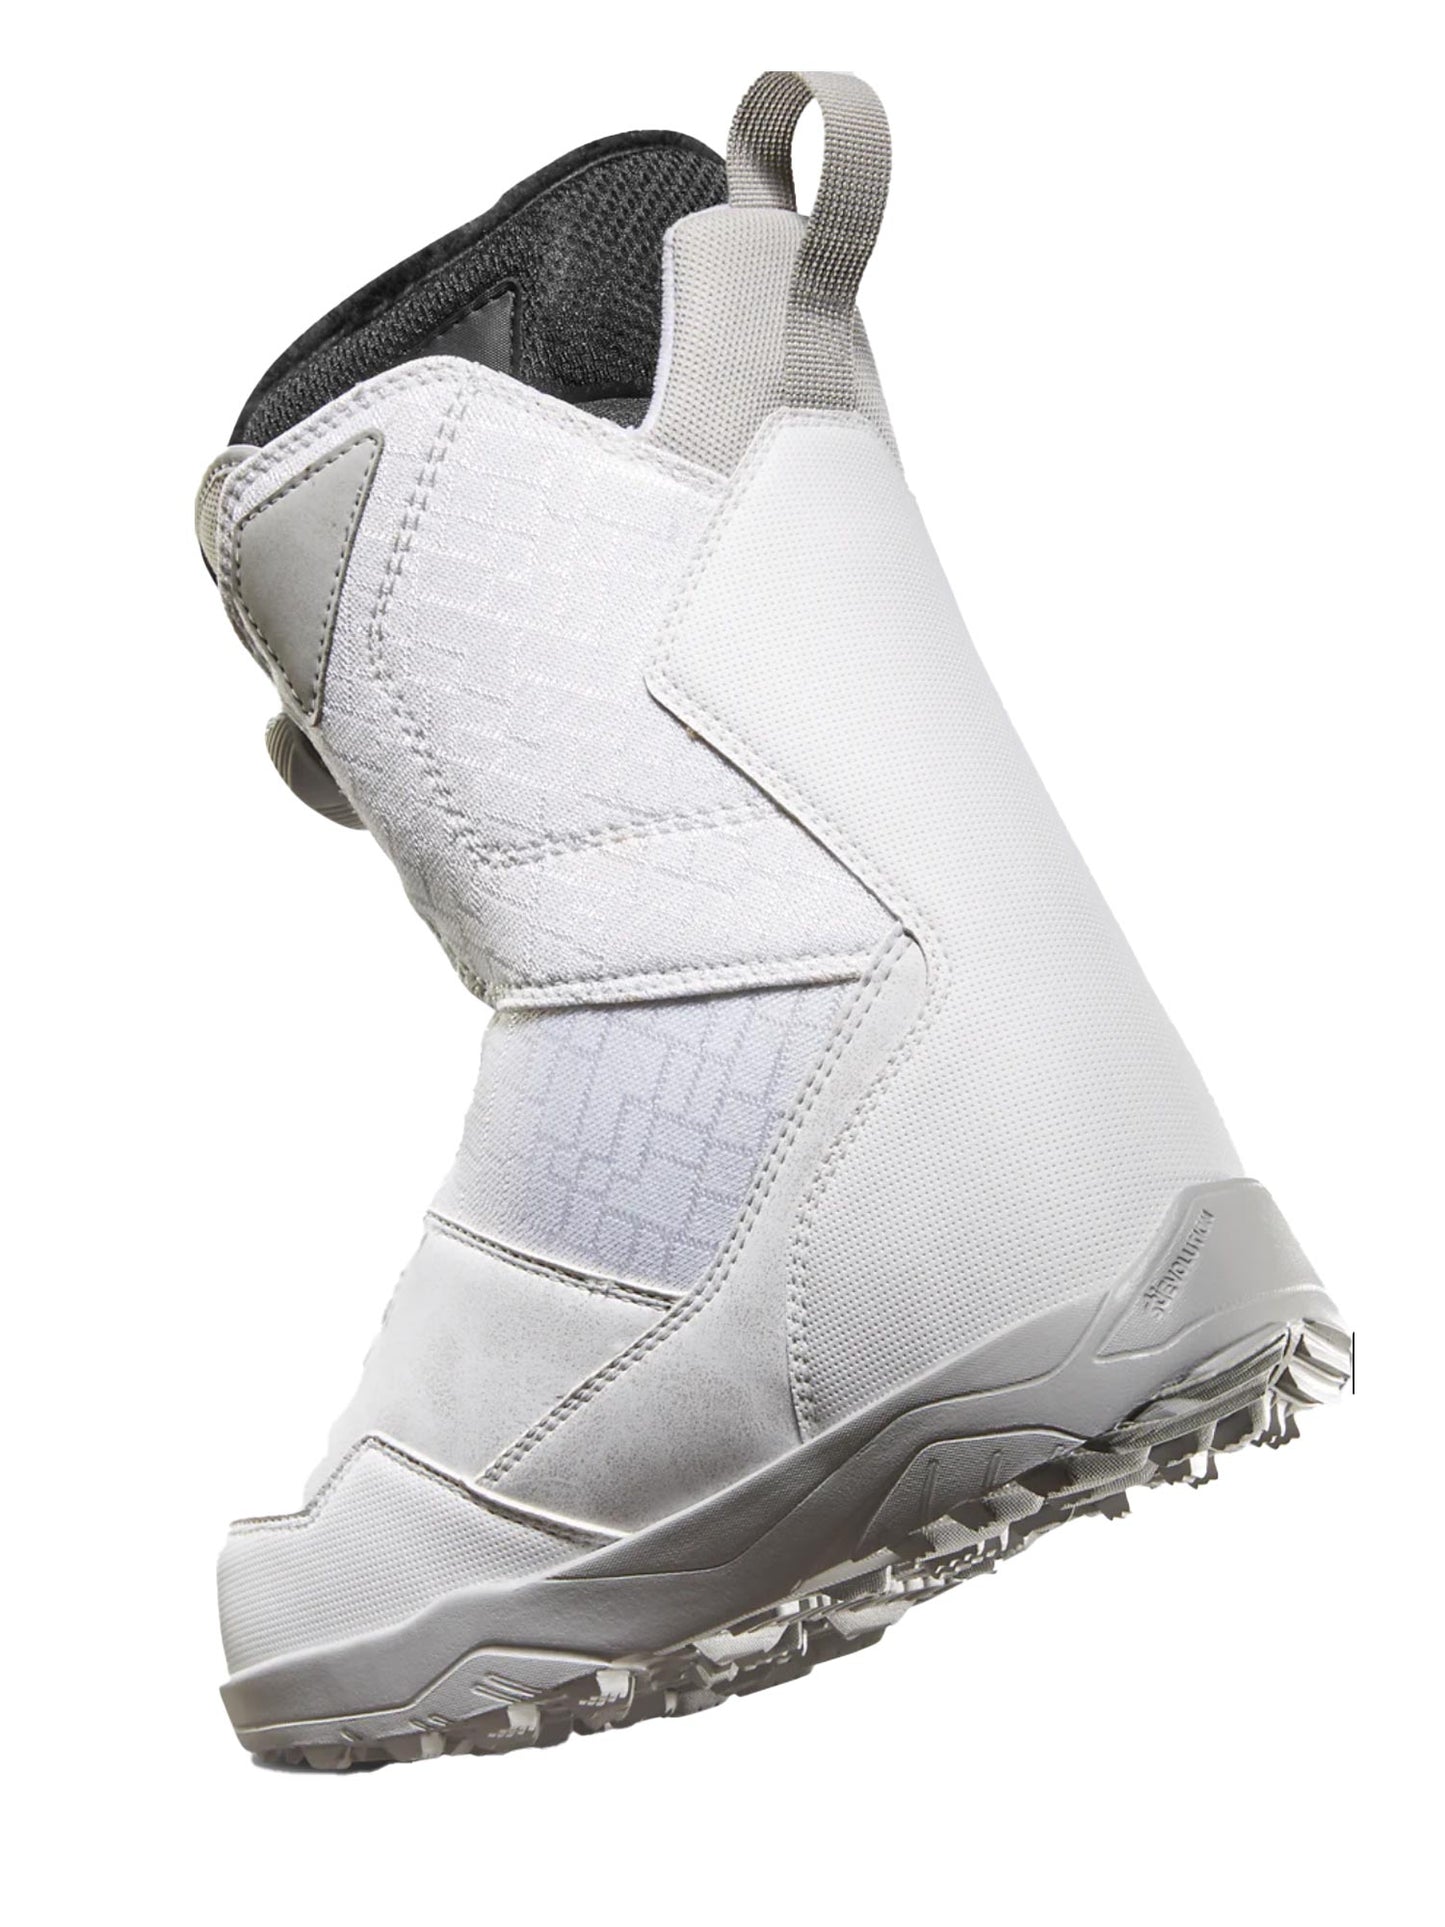 Thirty Two Shifty BOA Snowboard Boots - Women's